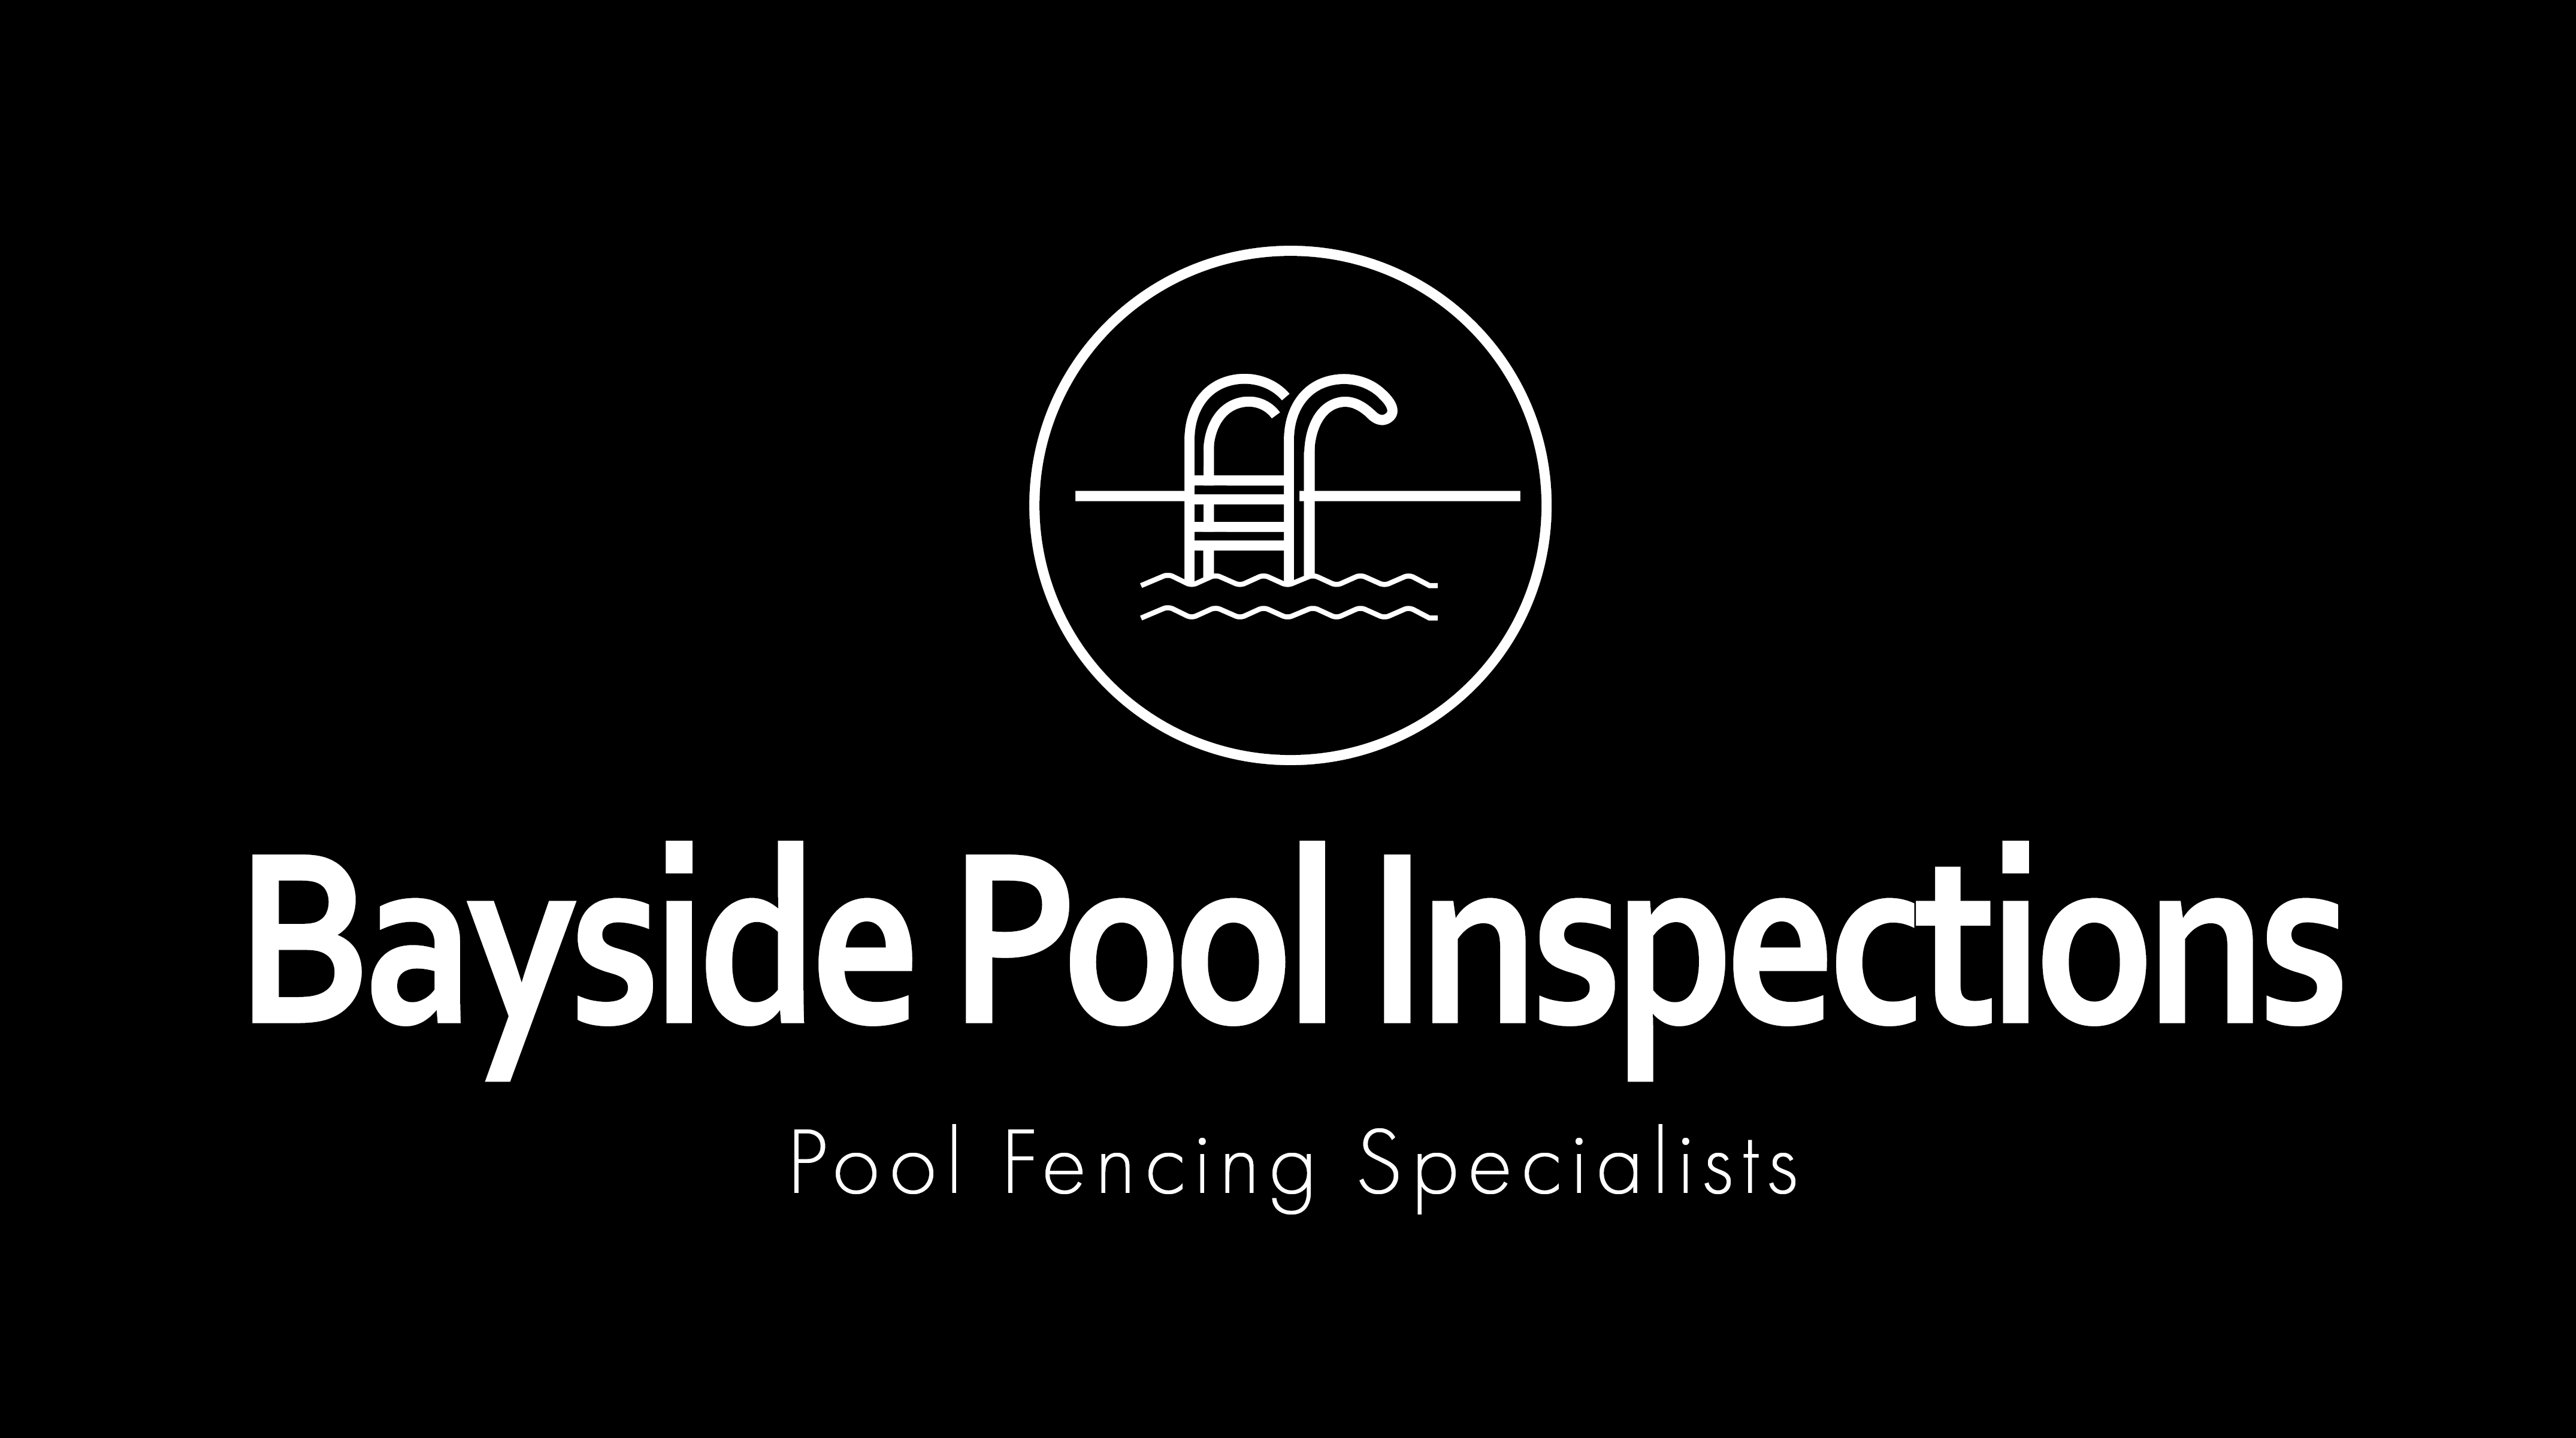 Bayside-Pool-Inspections-white-with-black-background2